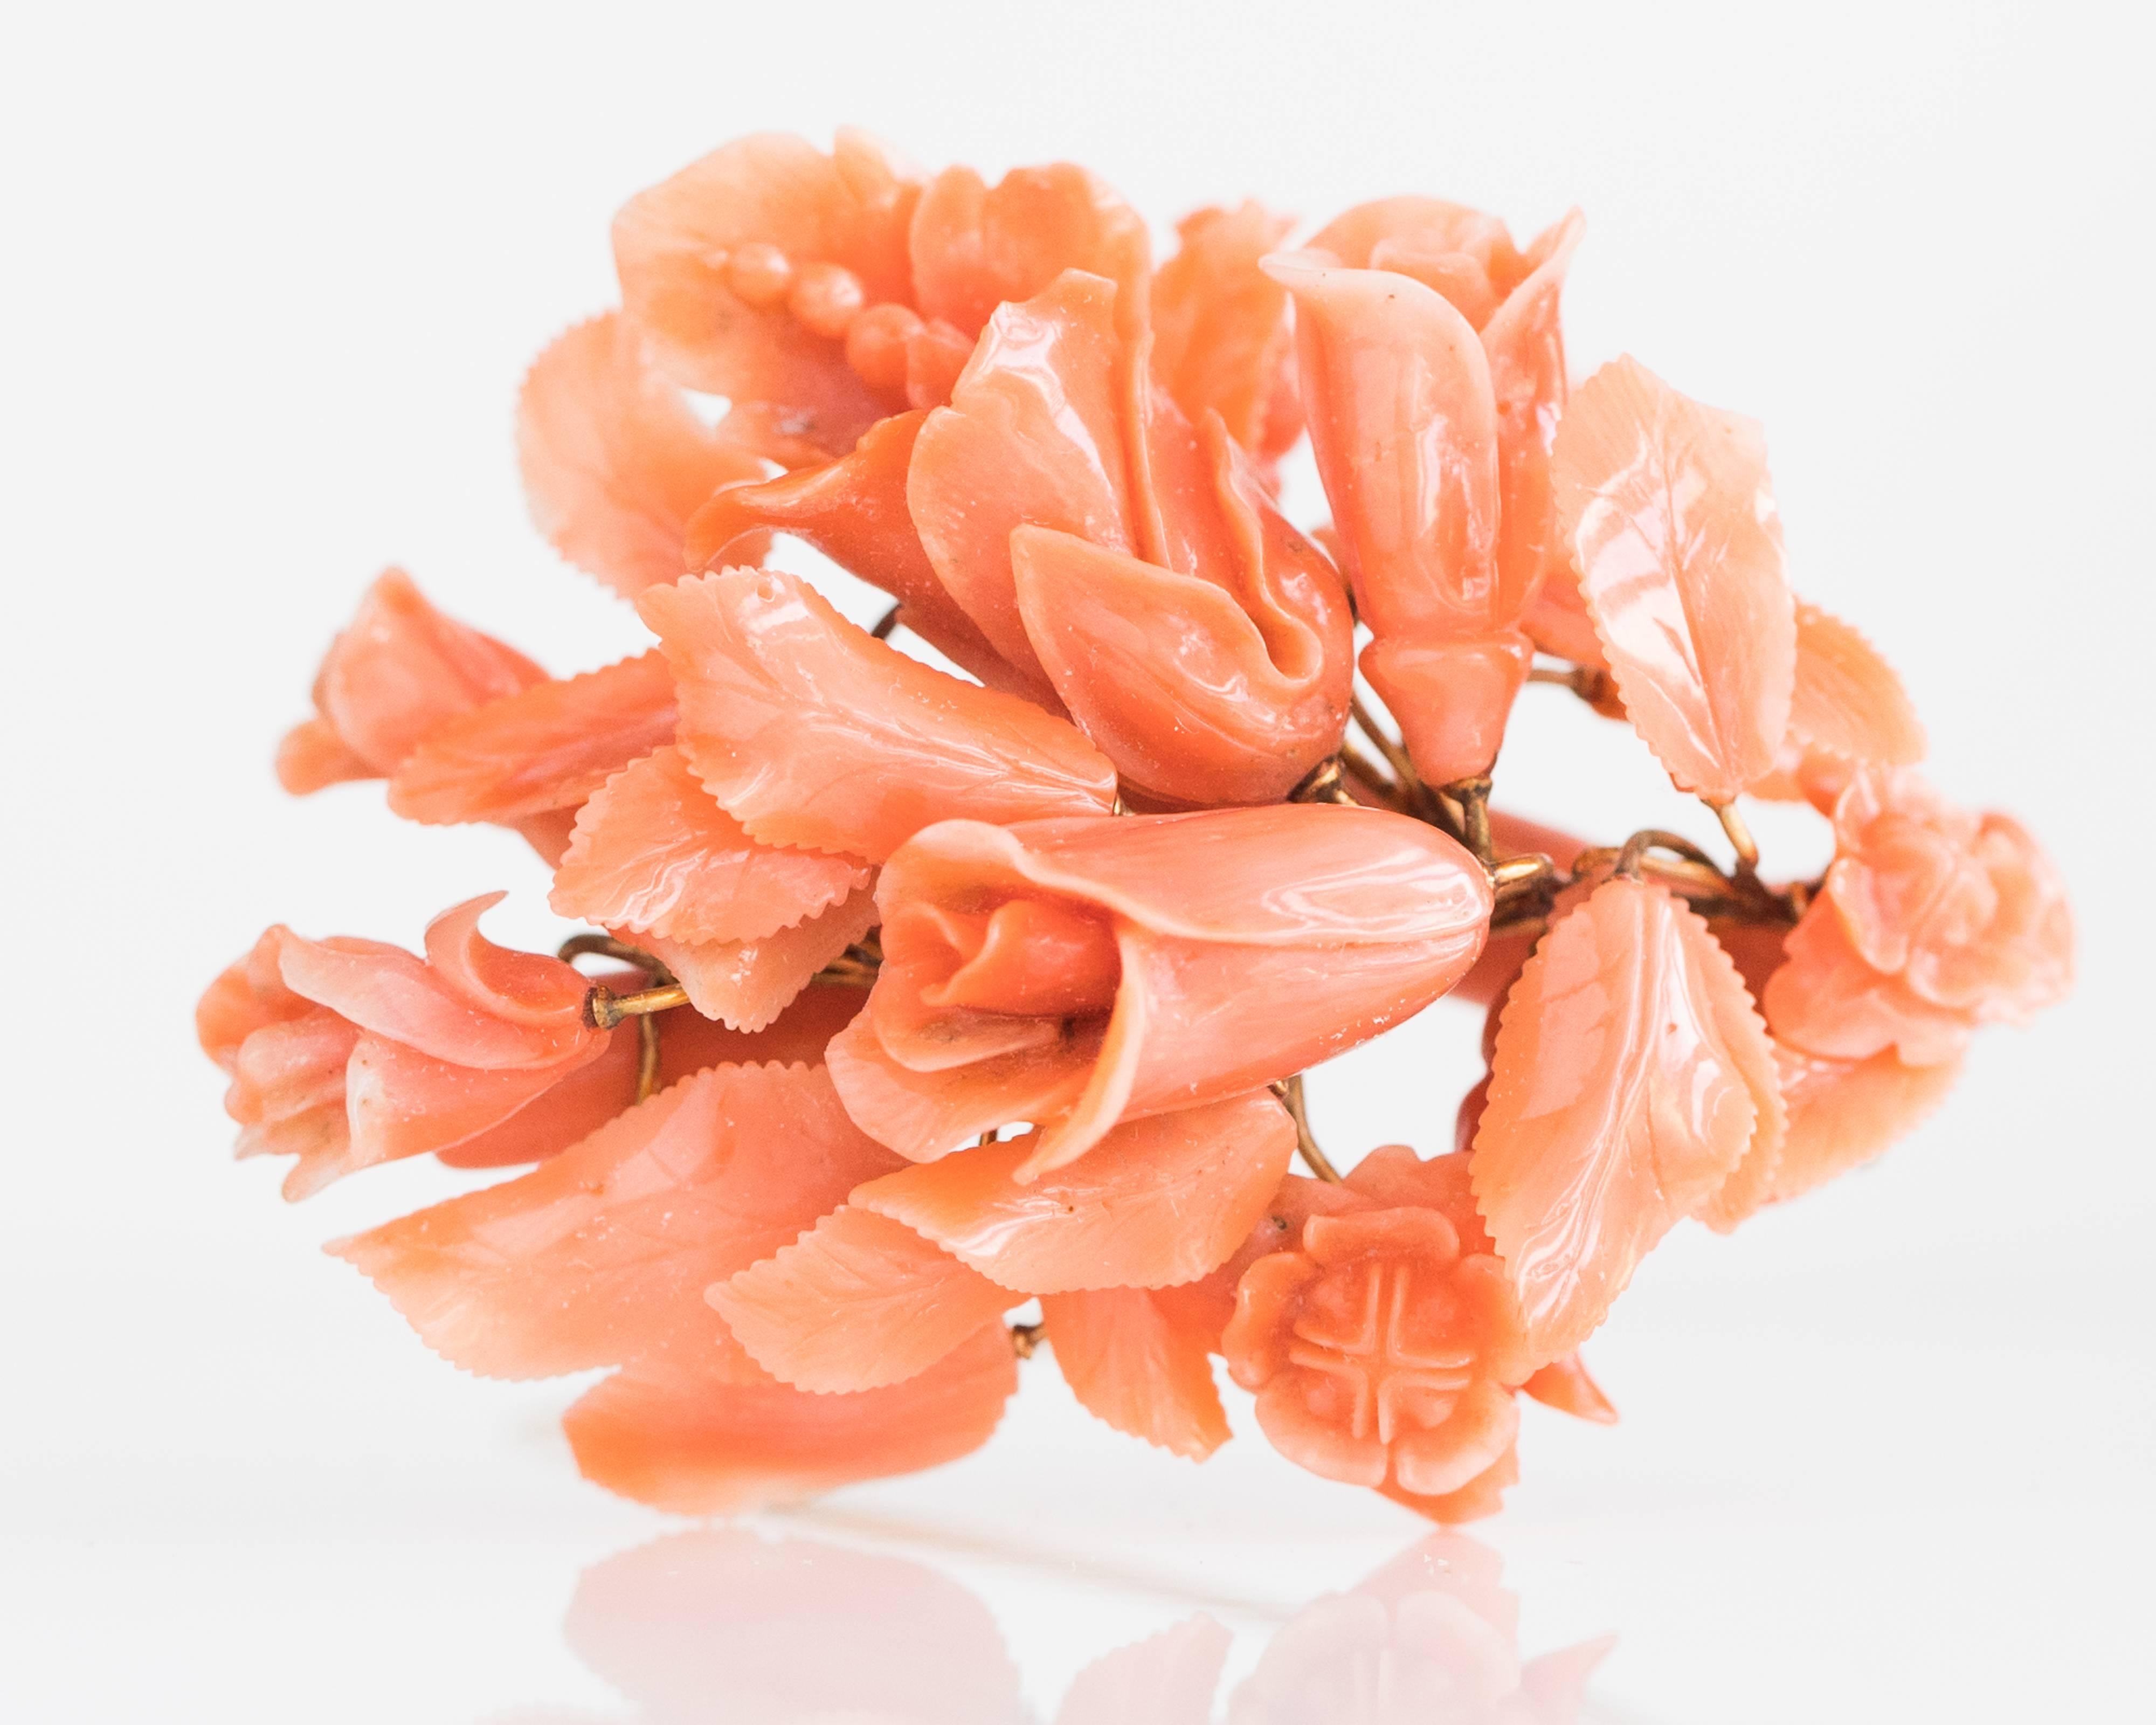 Handmade 1905 Victorian Floral Bouquet Natural Coral Brooch. This Antique pin features a 14 Karat and 9 Karat Gold mix characteristic of the time period. The Natural Coral has a high polish.

A single coral branch forms the base of this exquisite